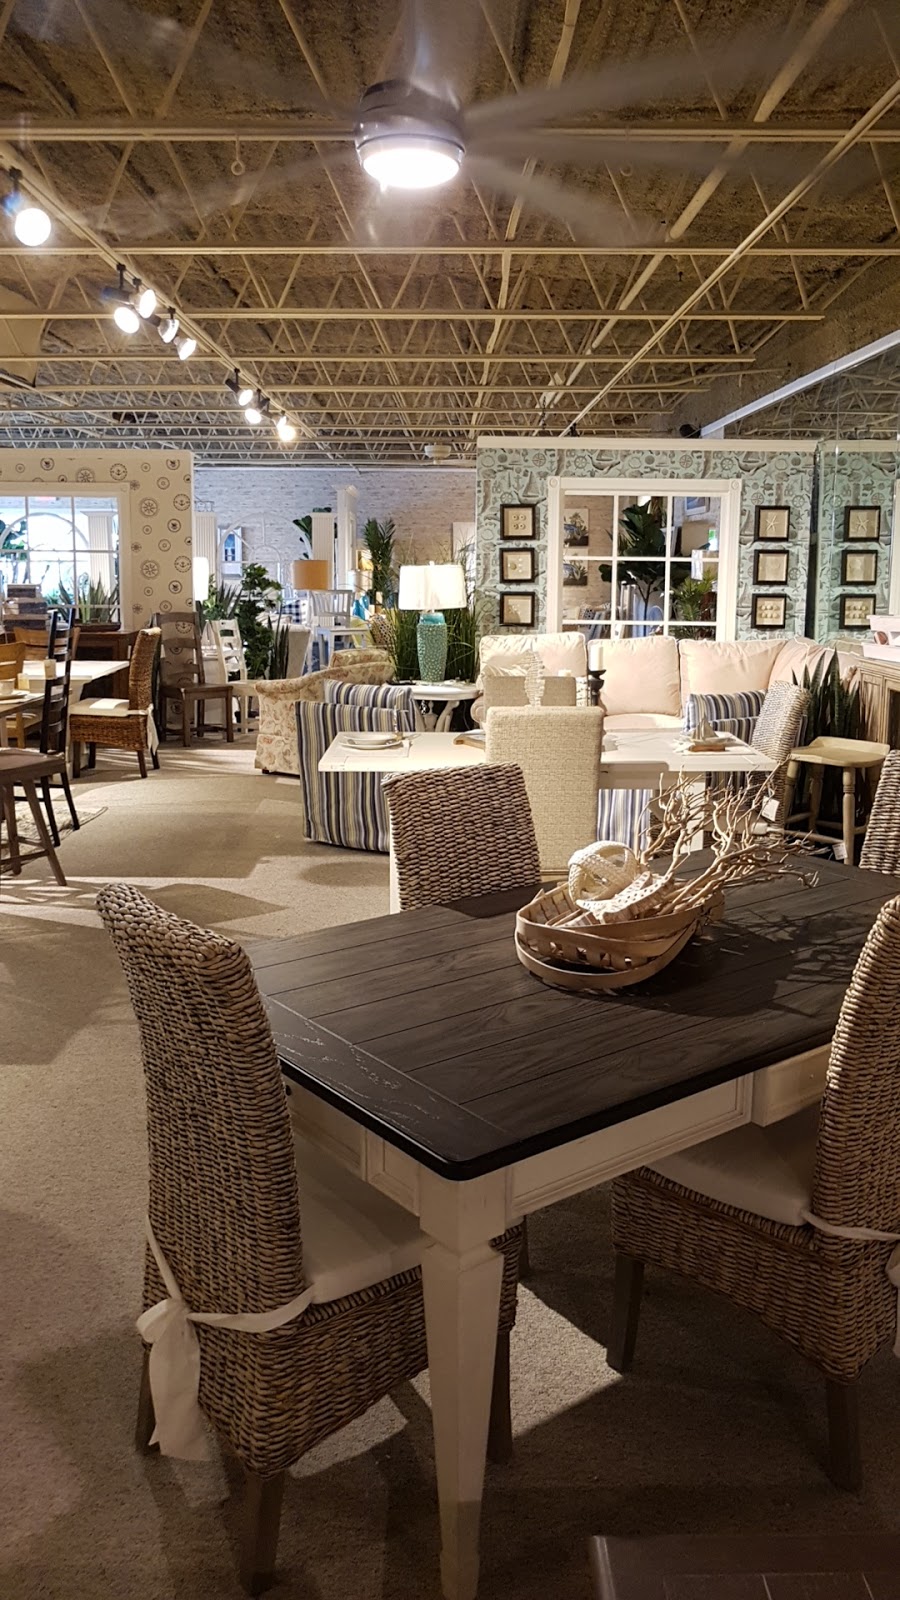 Surfside Casual Furniture | 11 MacArthur Blvd, Somers Point, NJ 08244 | Phone: (609) 927-4000